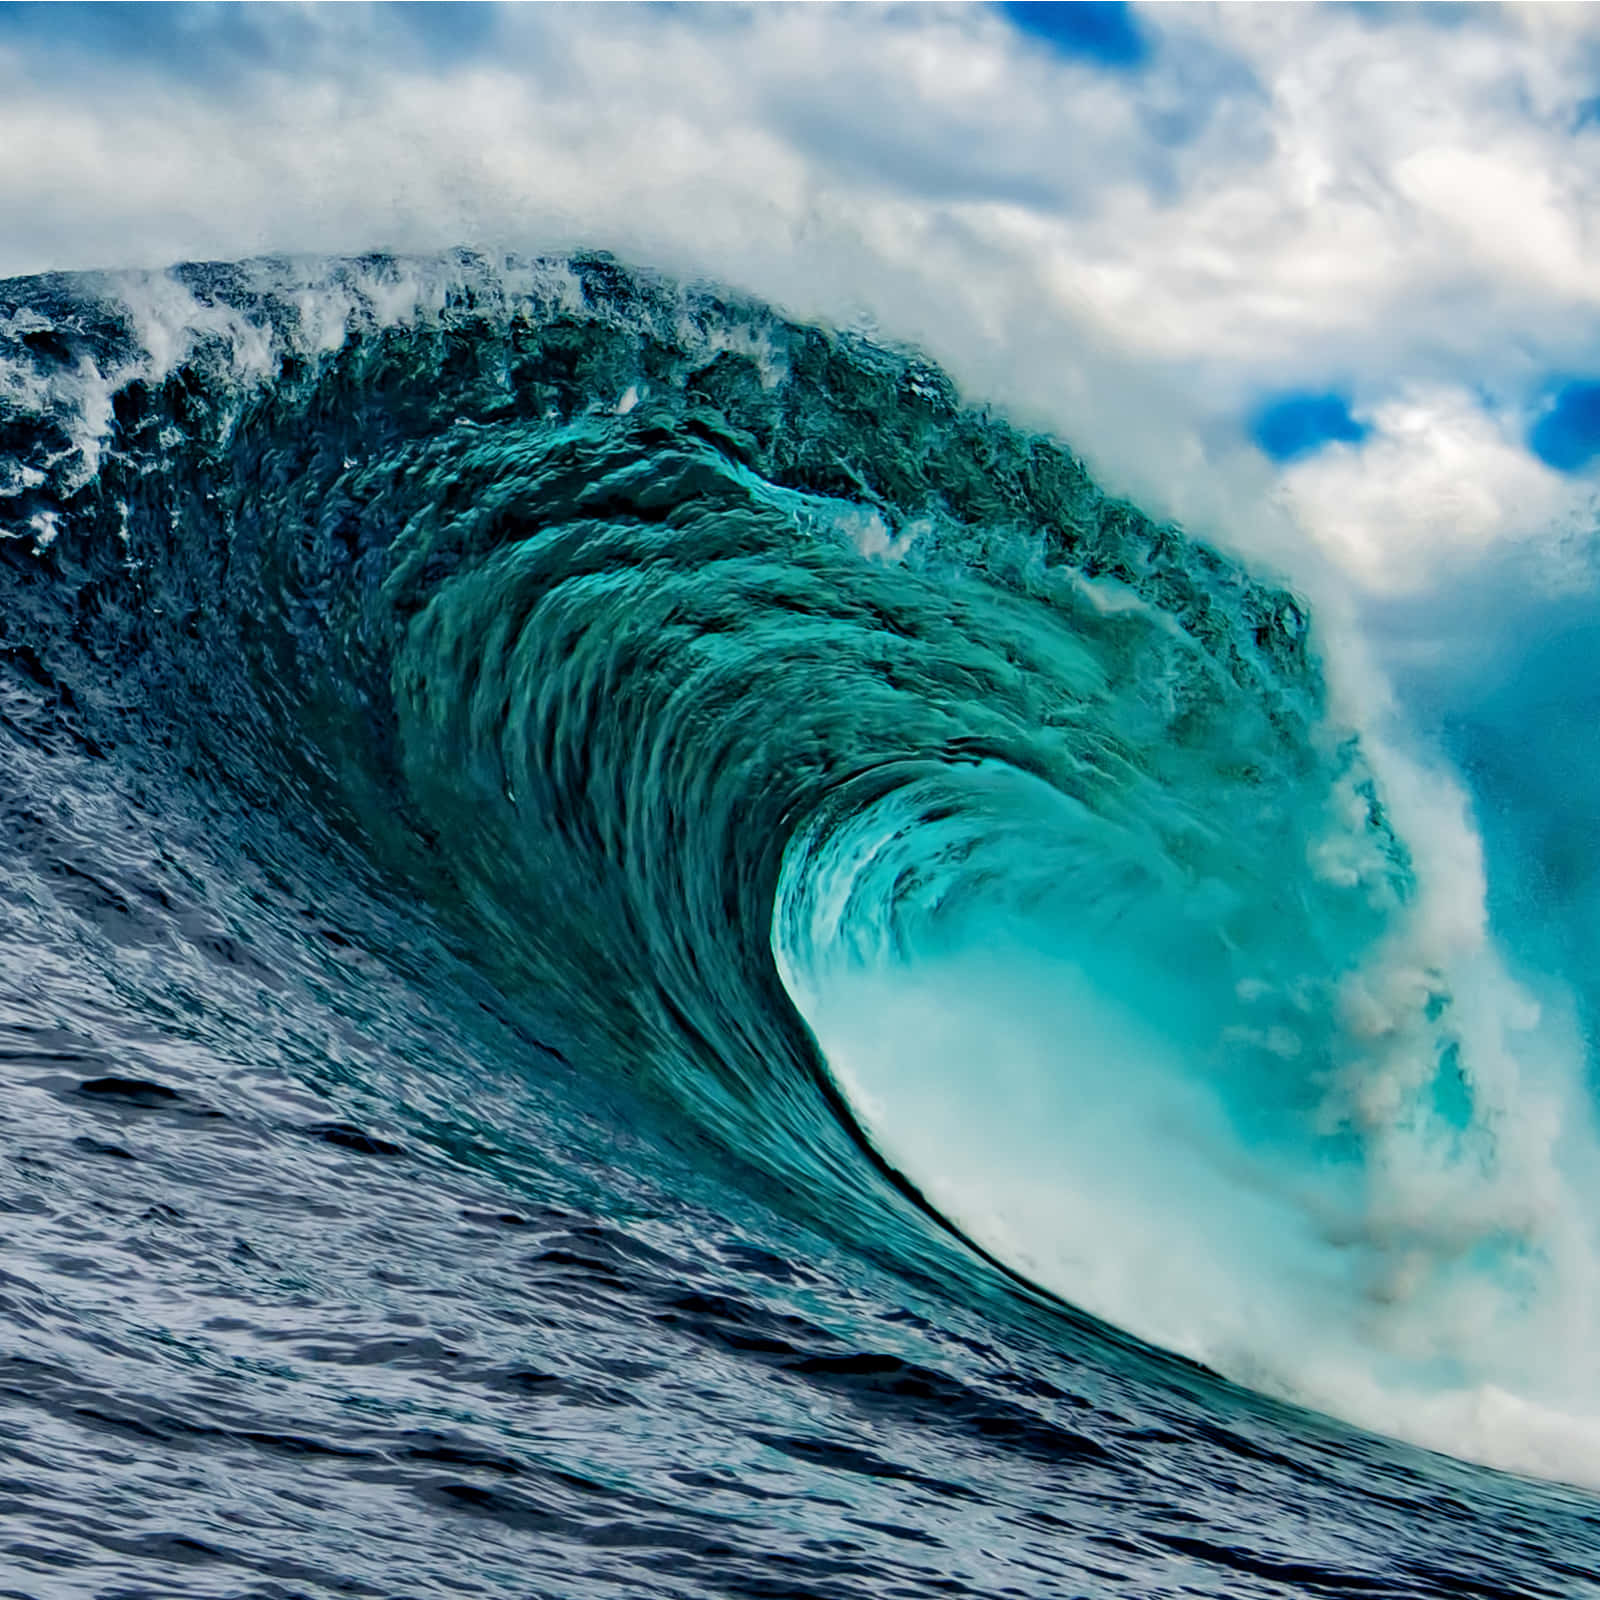 The Majestic Beauty of a Wave